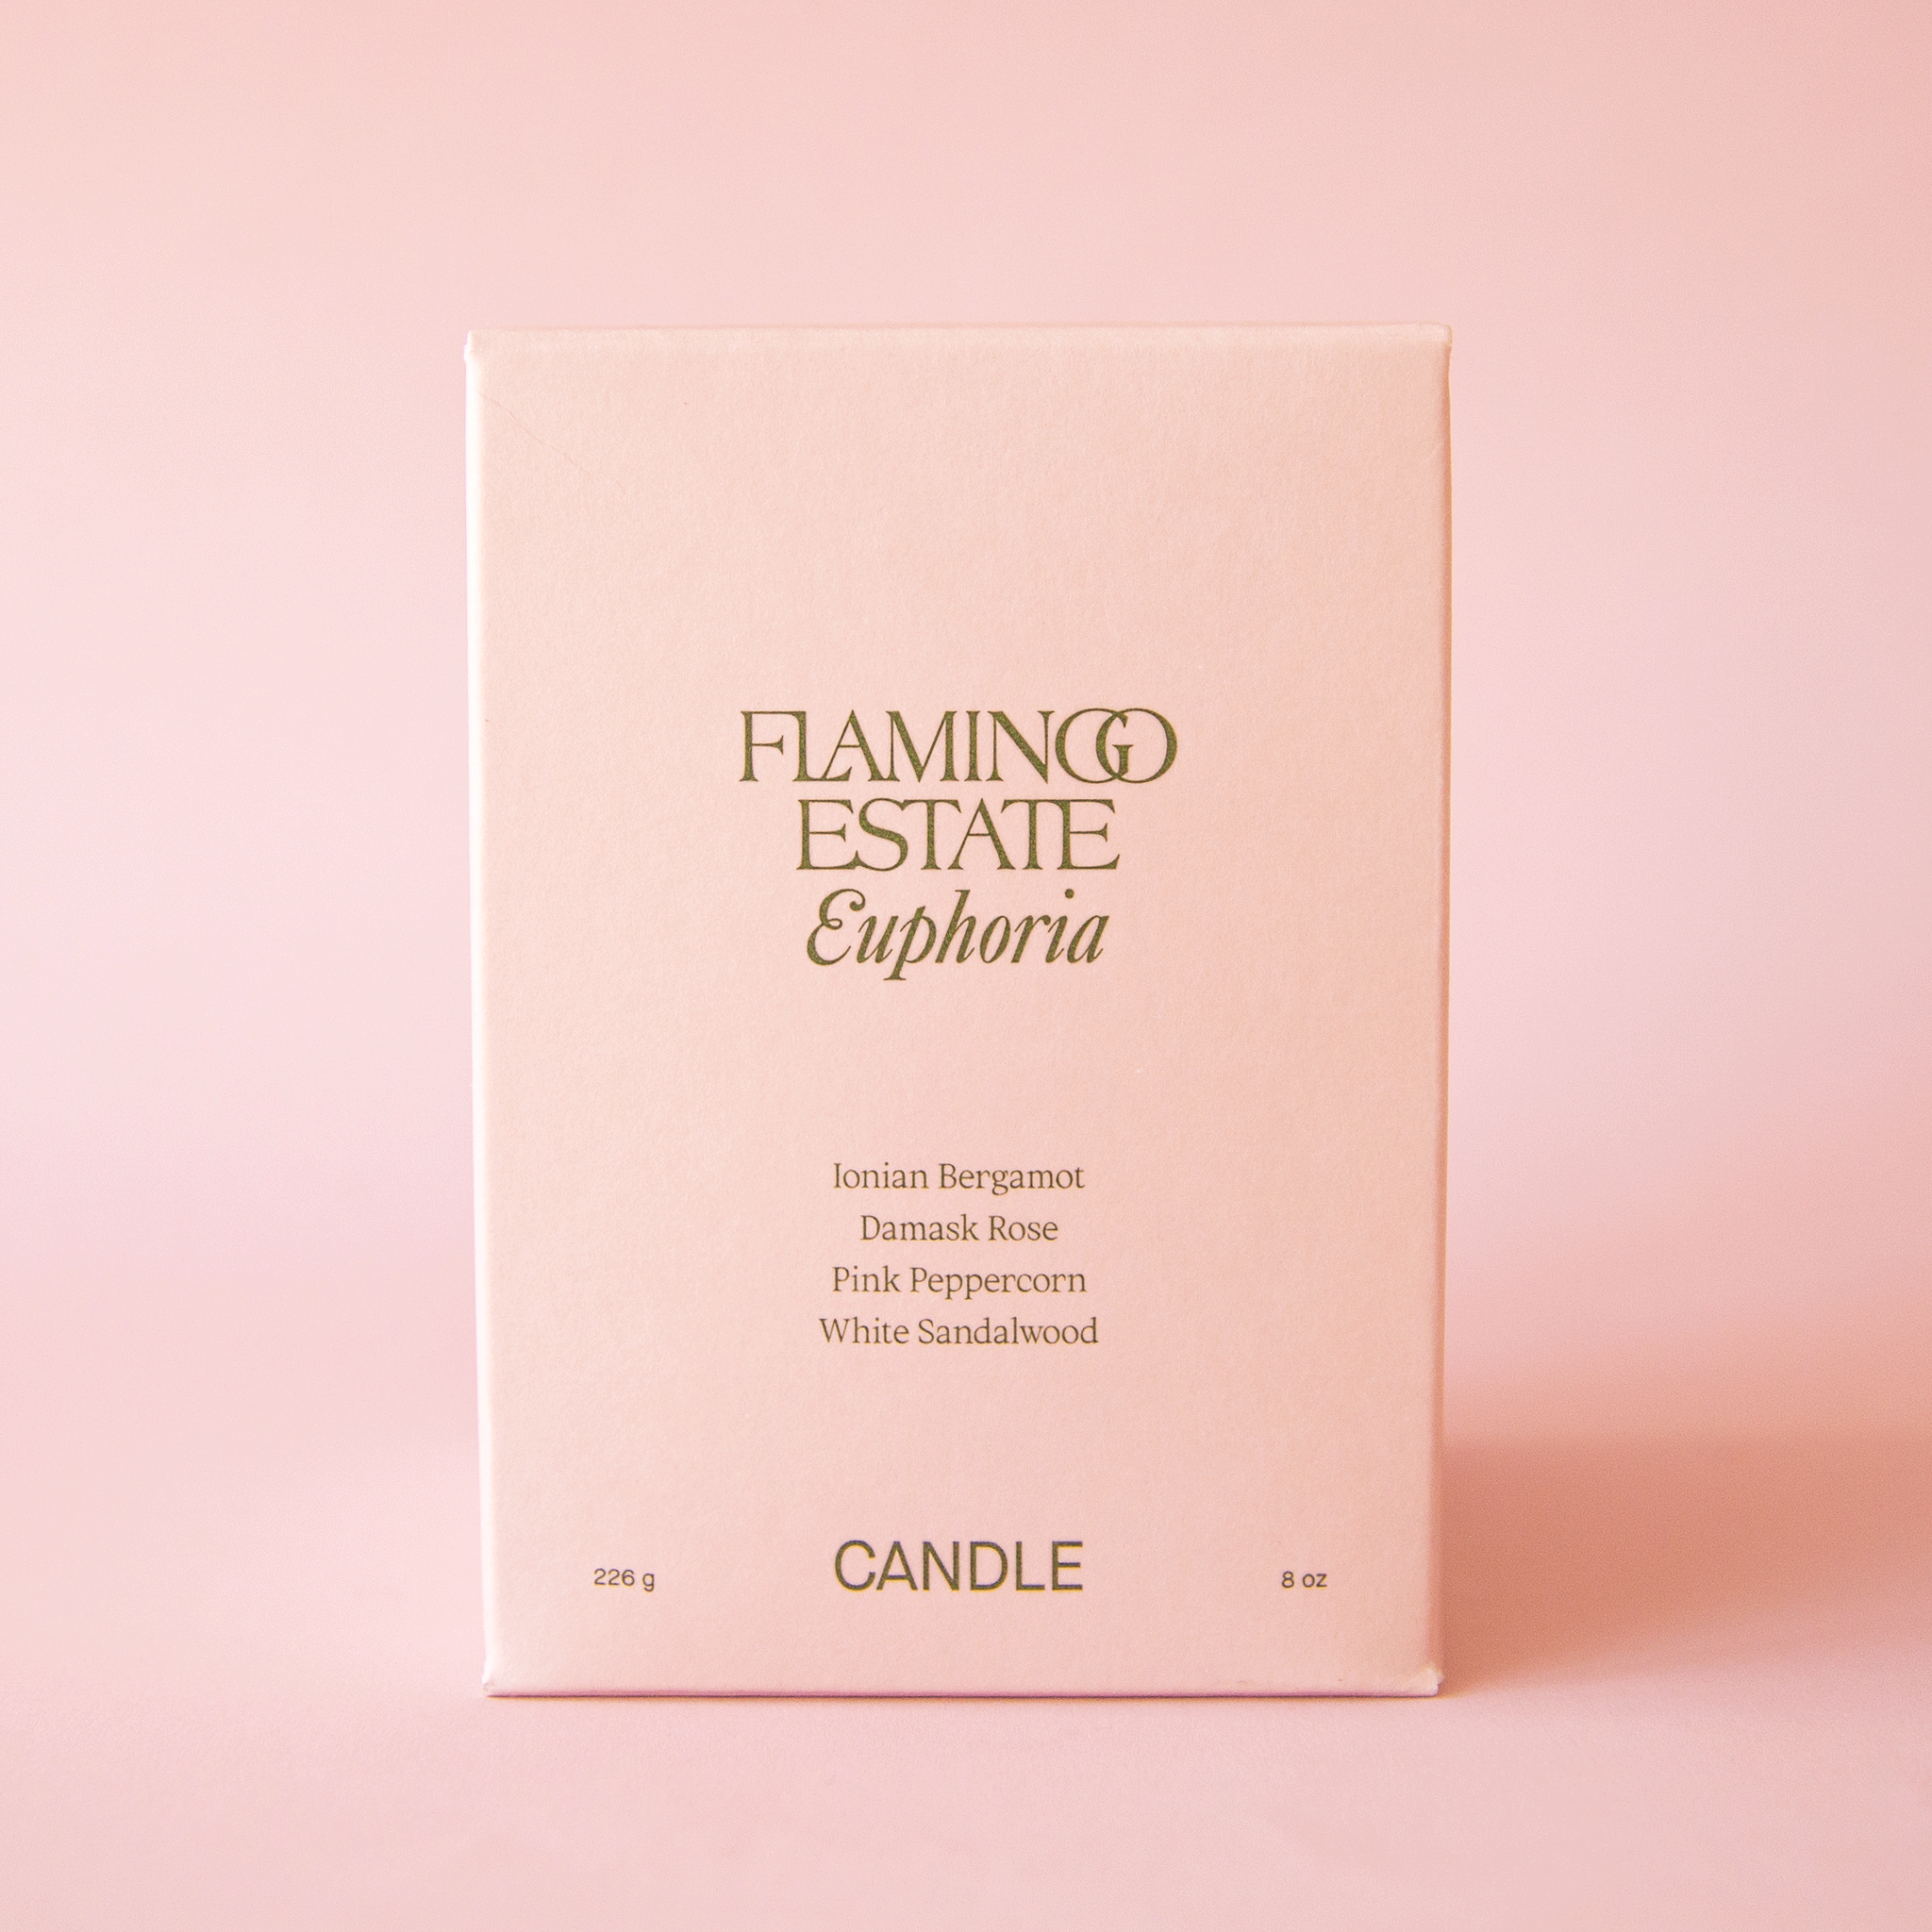 On a pink background is a light tan / pink box filled with a candle and text on the front that reads, "Flamingo Estate Euphoria Candle". 